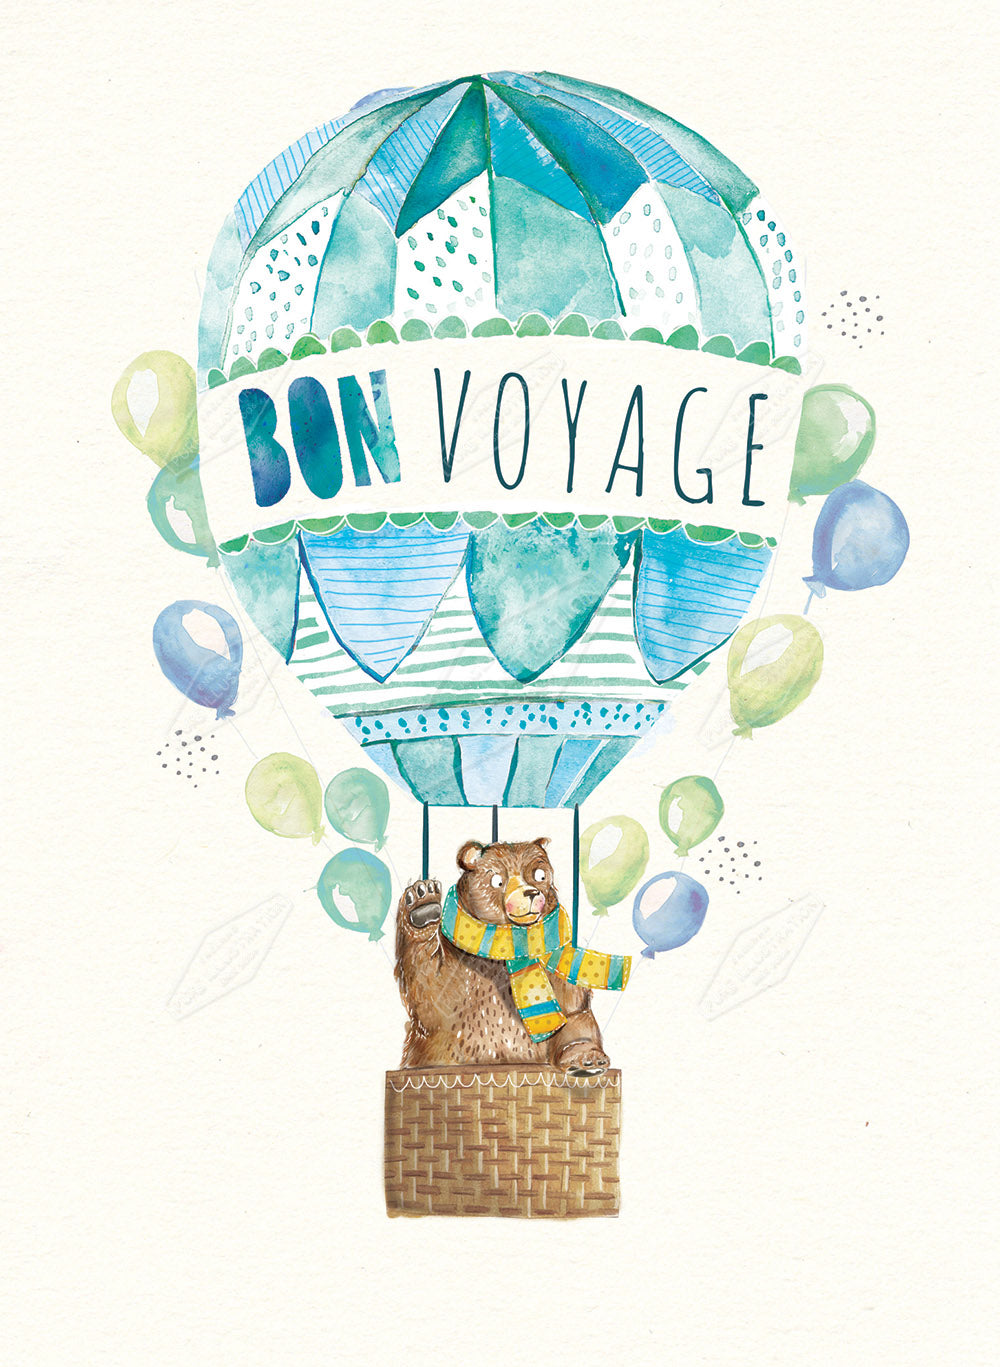 00028551EST- Emily Stalley is represented by Pure Art Licensing Agency - Bon Voyage Greeting Card Design